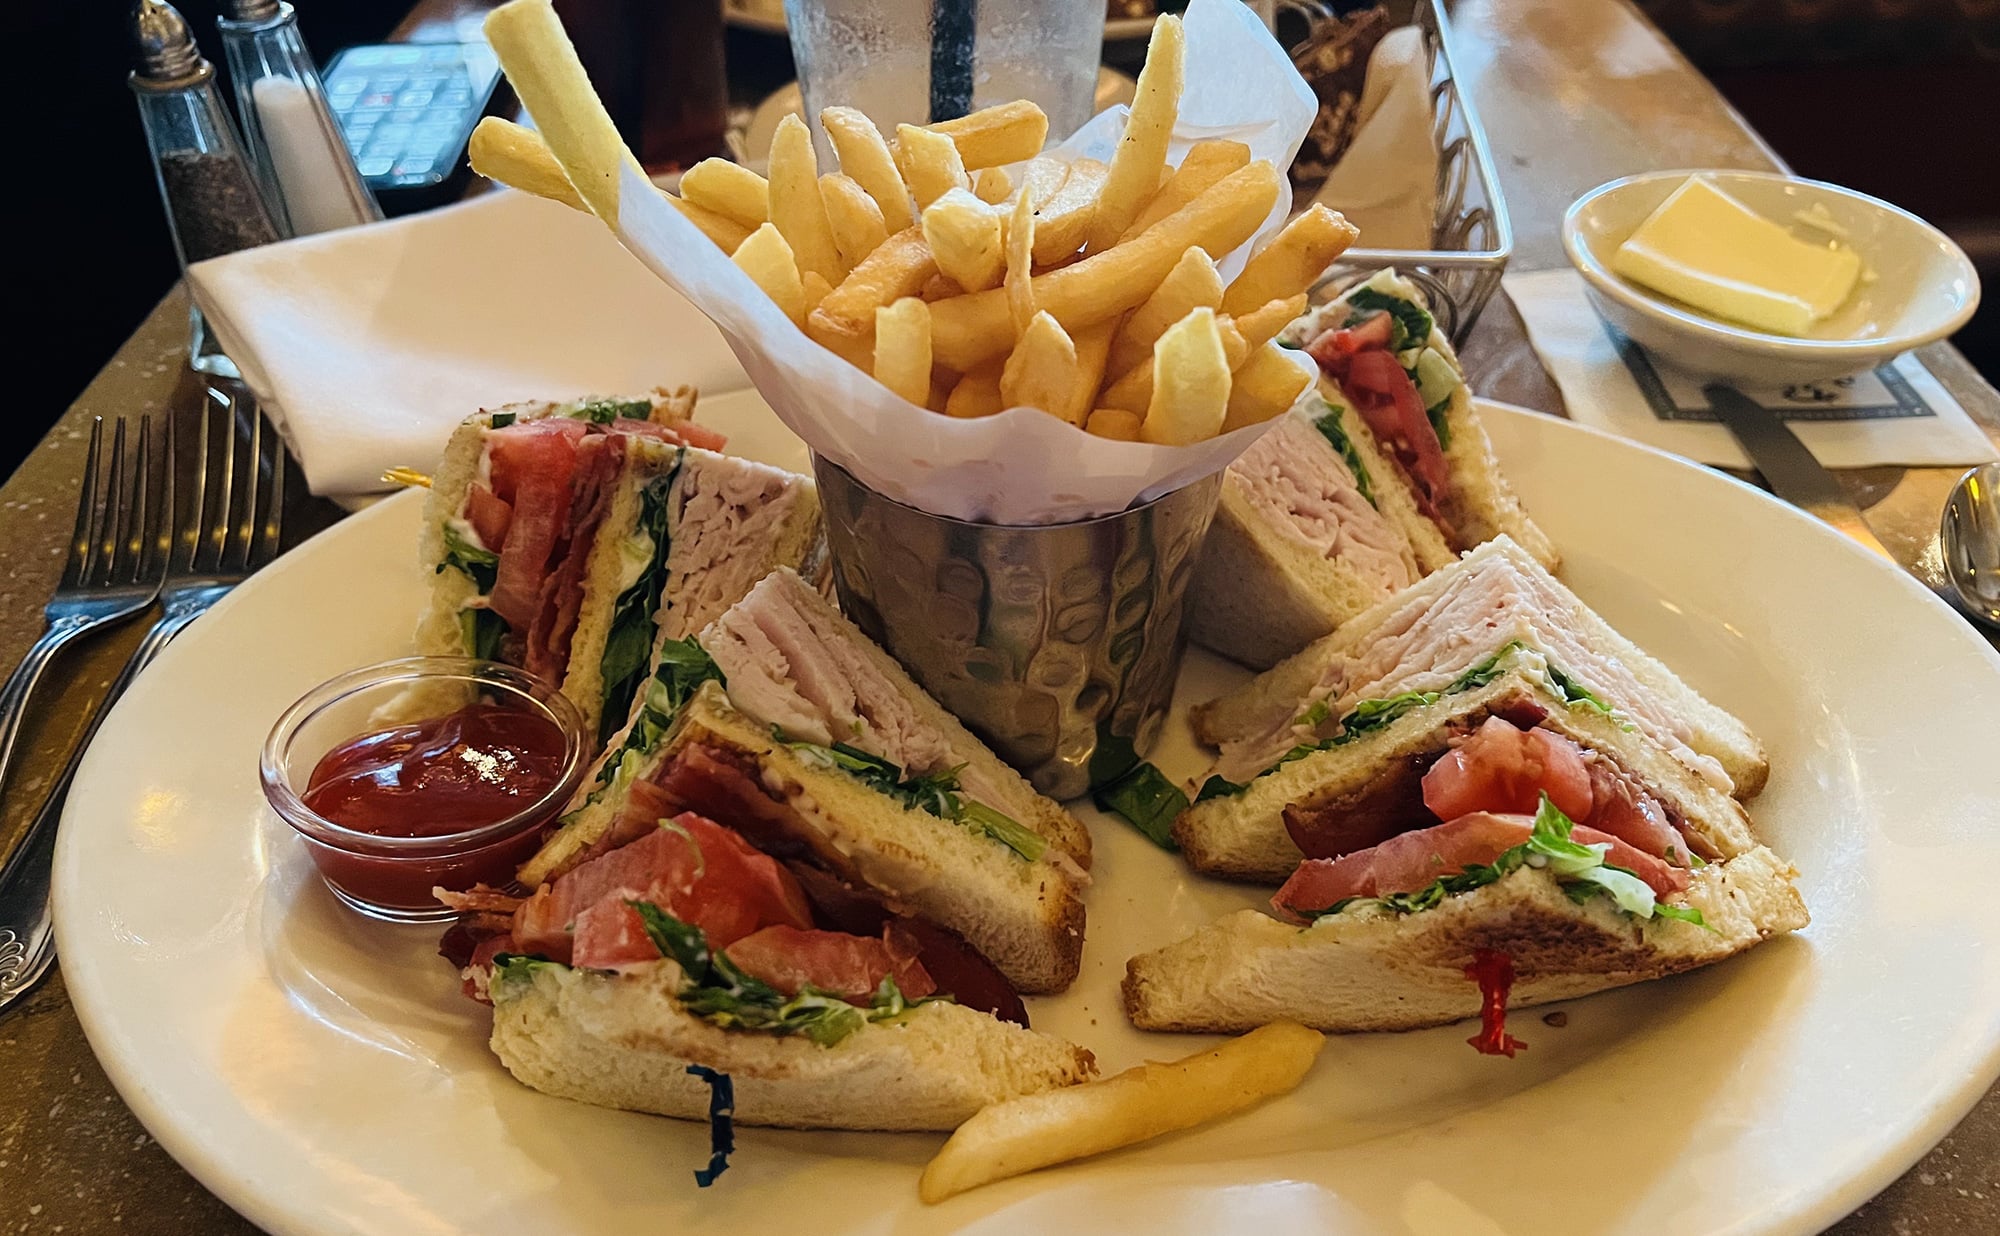 A plate with sandwiches and fries on it.